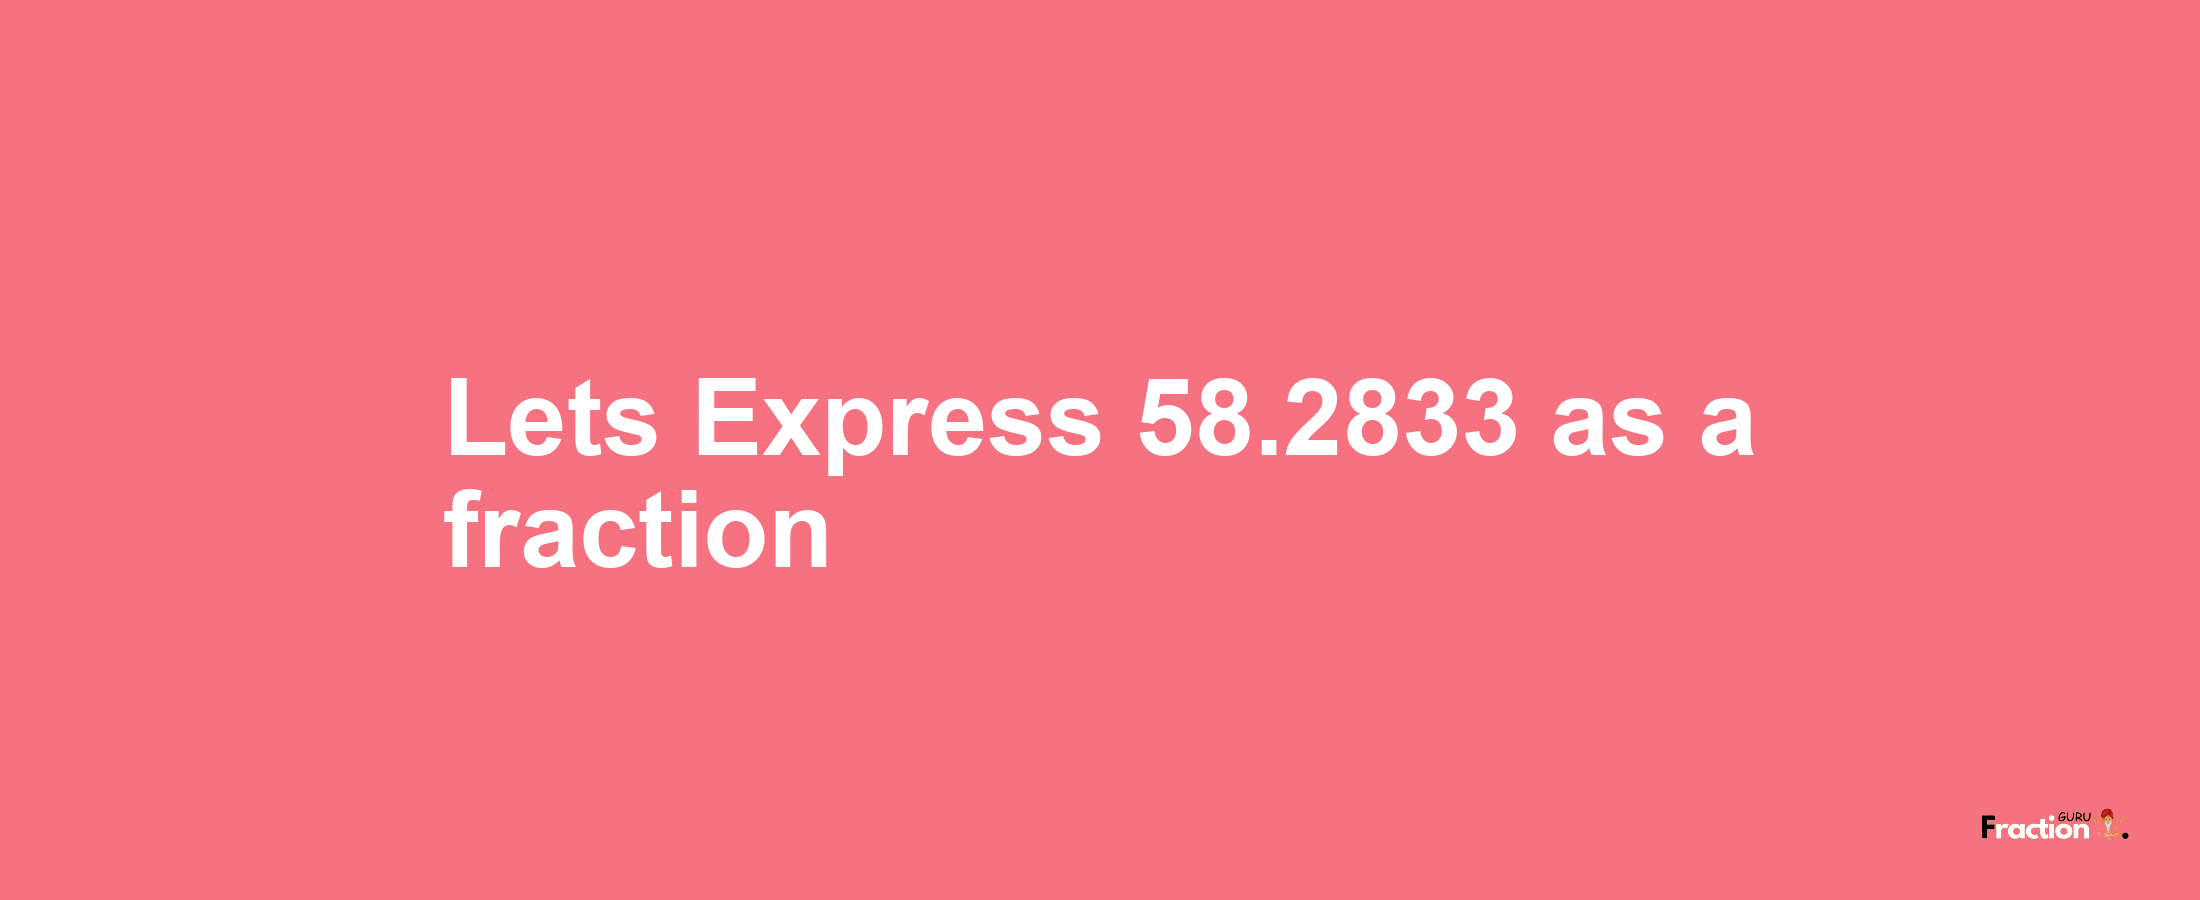 Lets Express 58.2833 as afraction